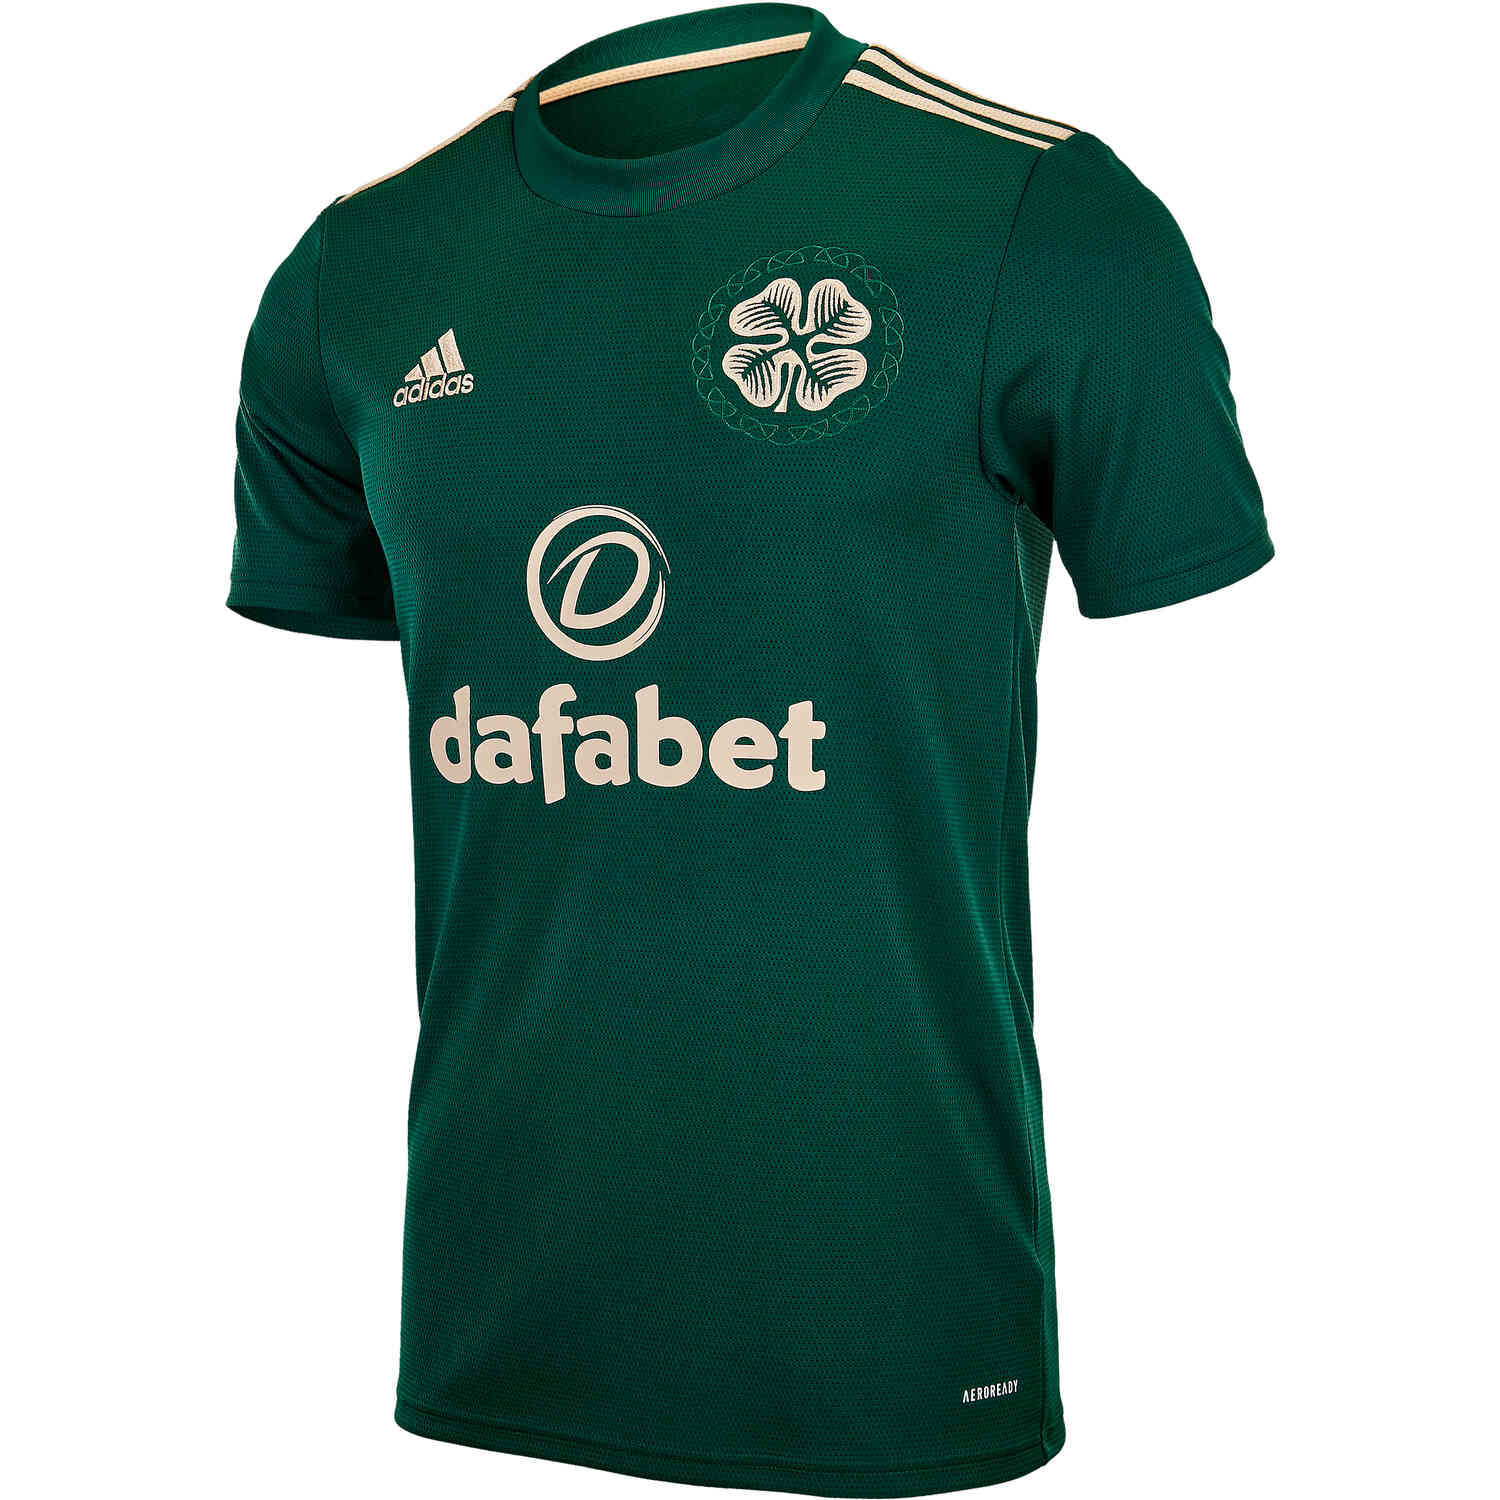 New Adidas international kits could send Celtic jersey clues for 21-22